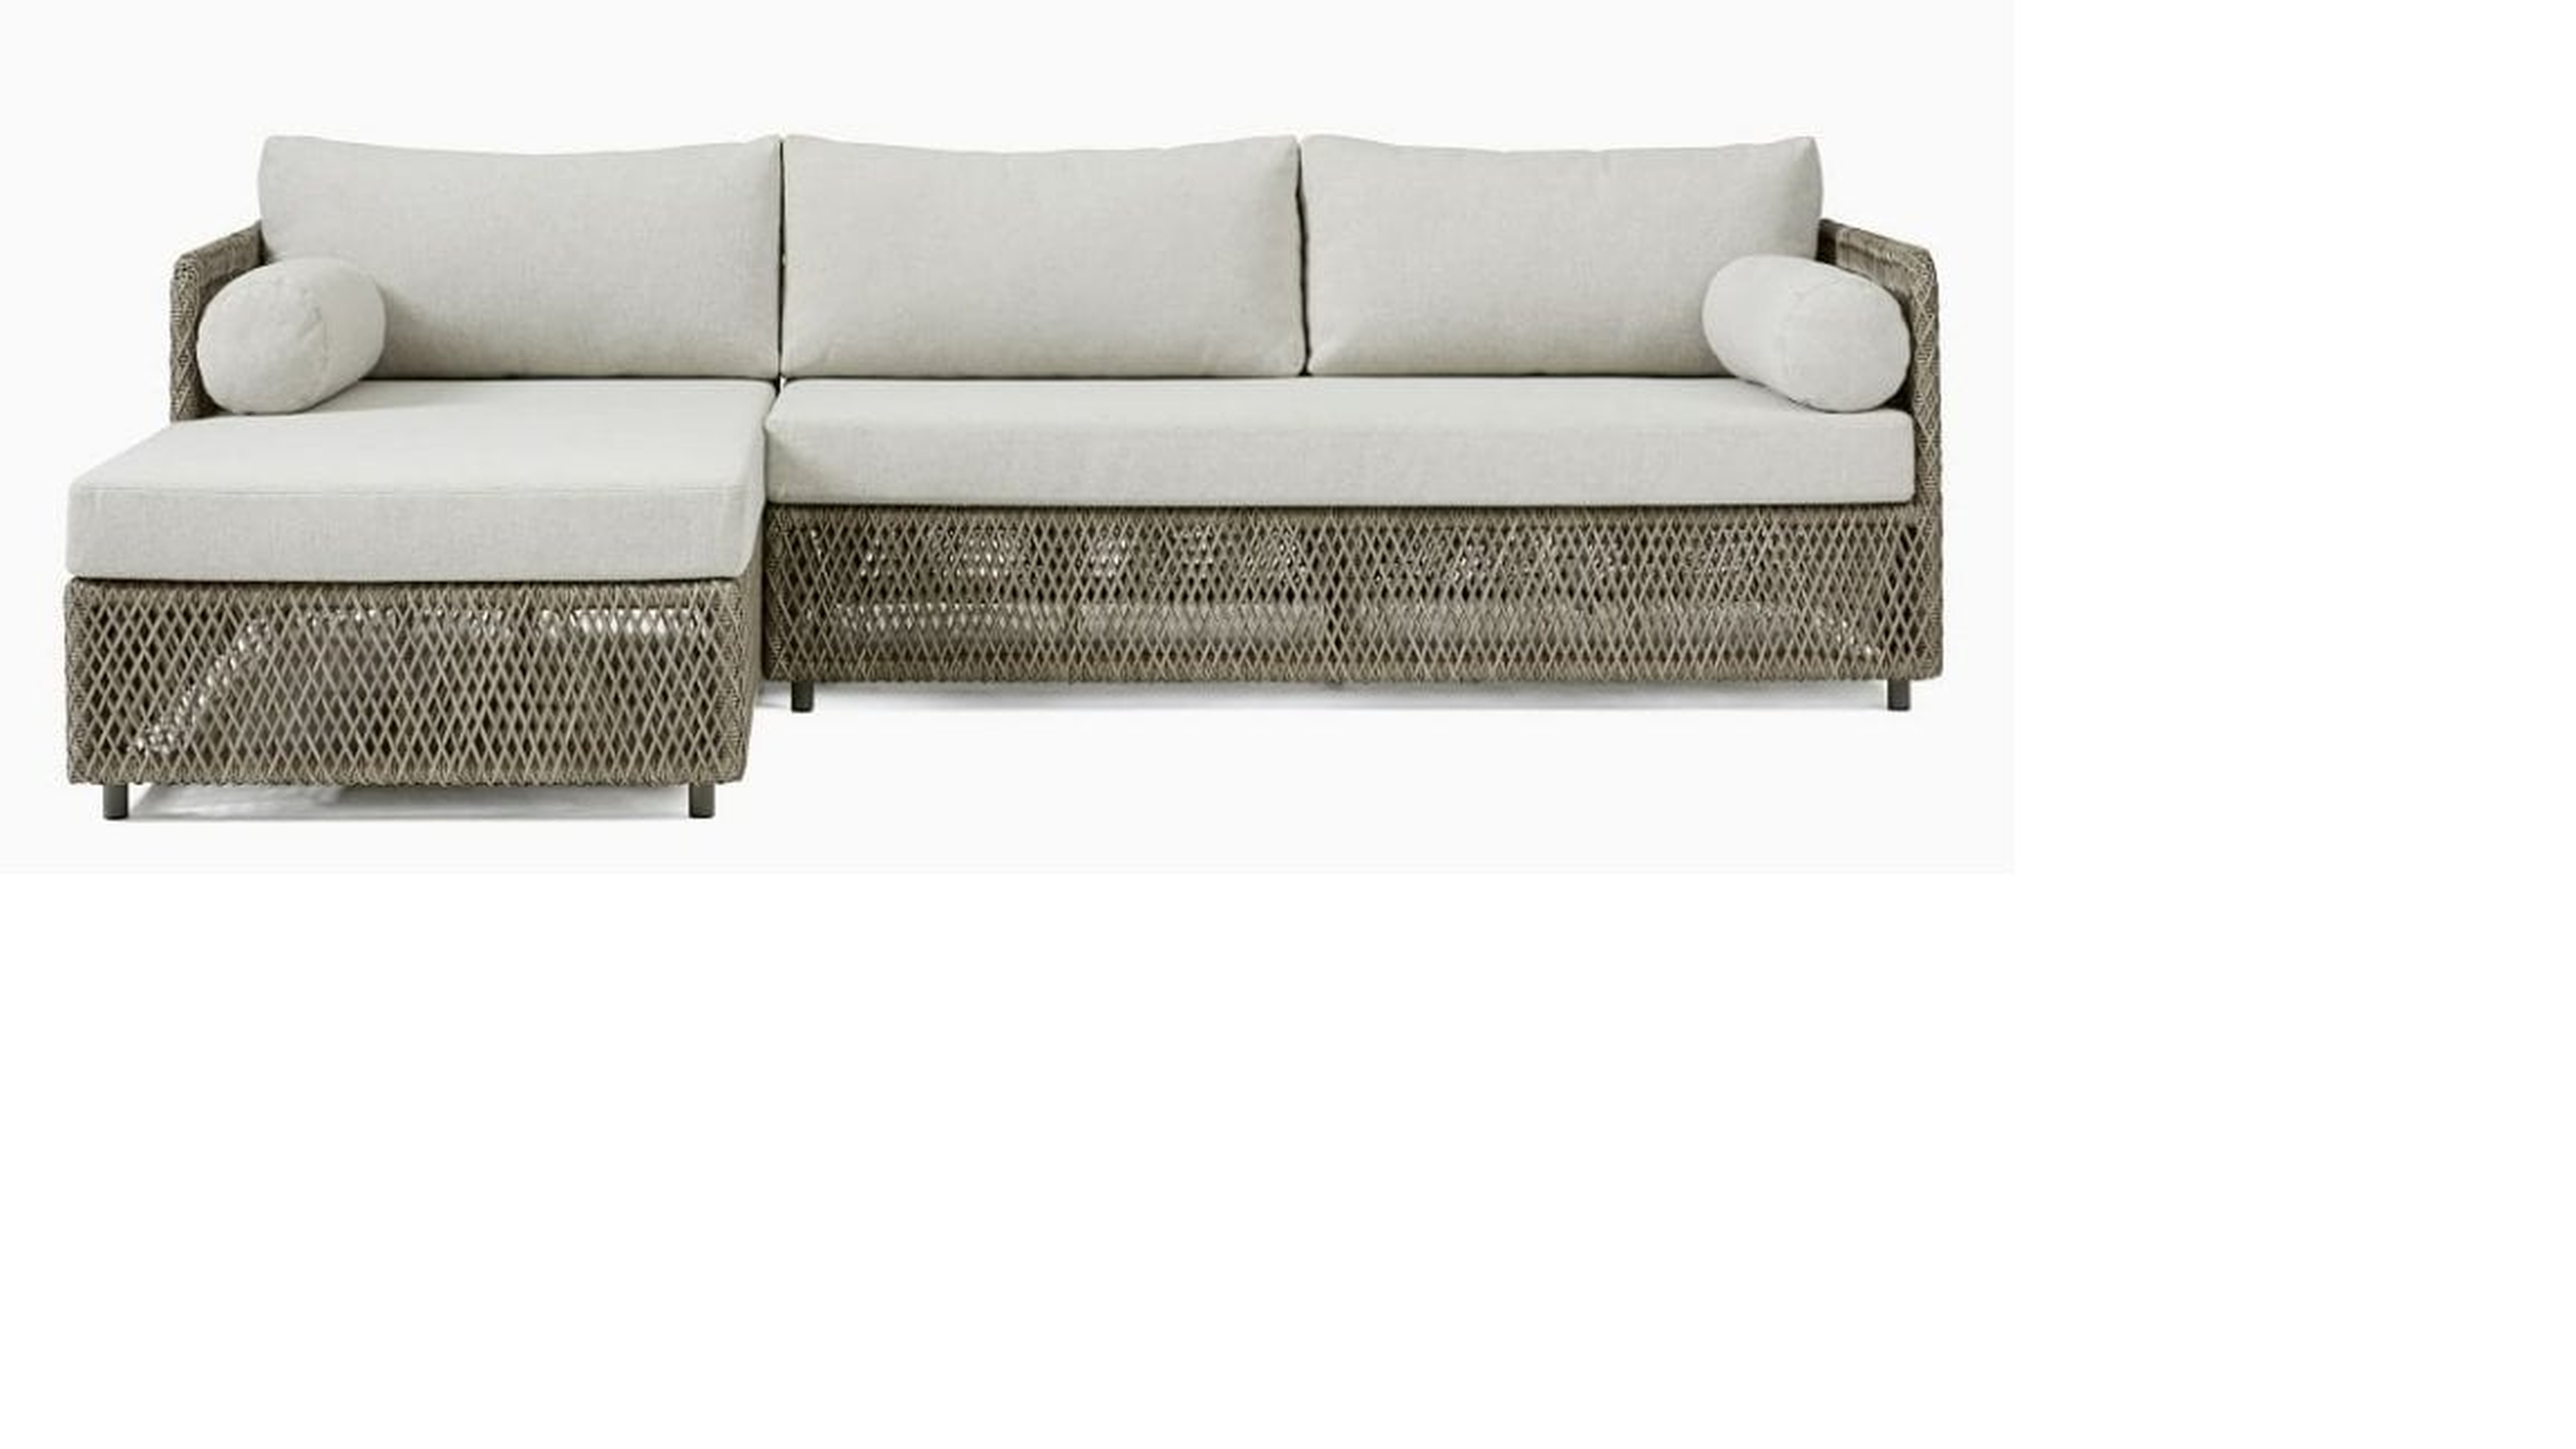 Coastal Outdoor 2-Piece Chaise Sectional - West Elm